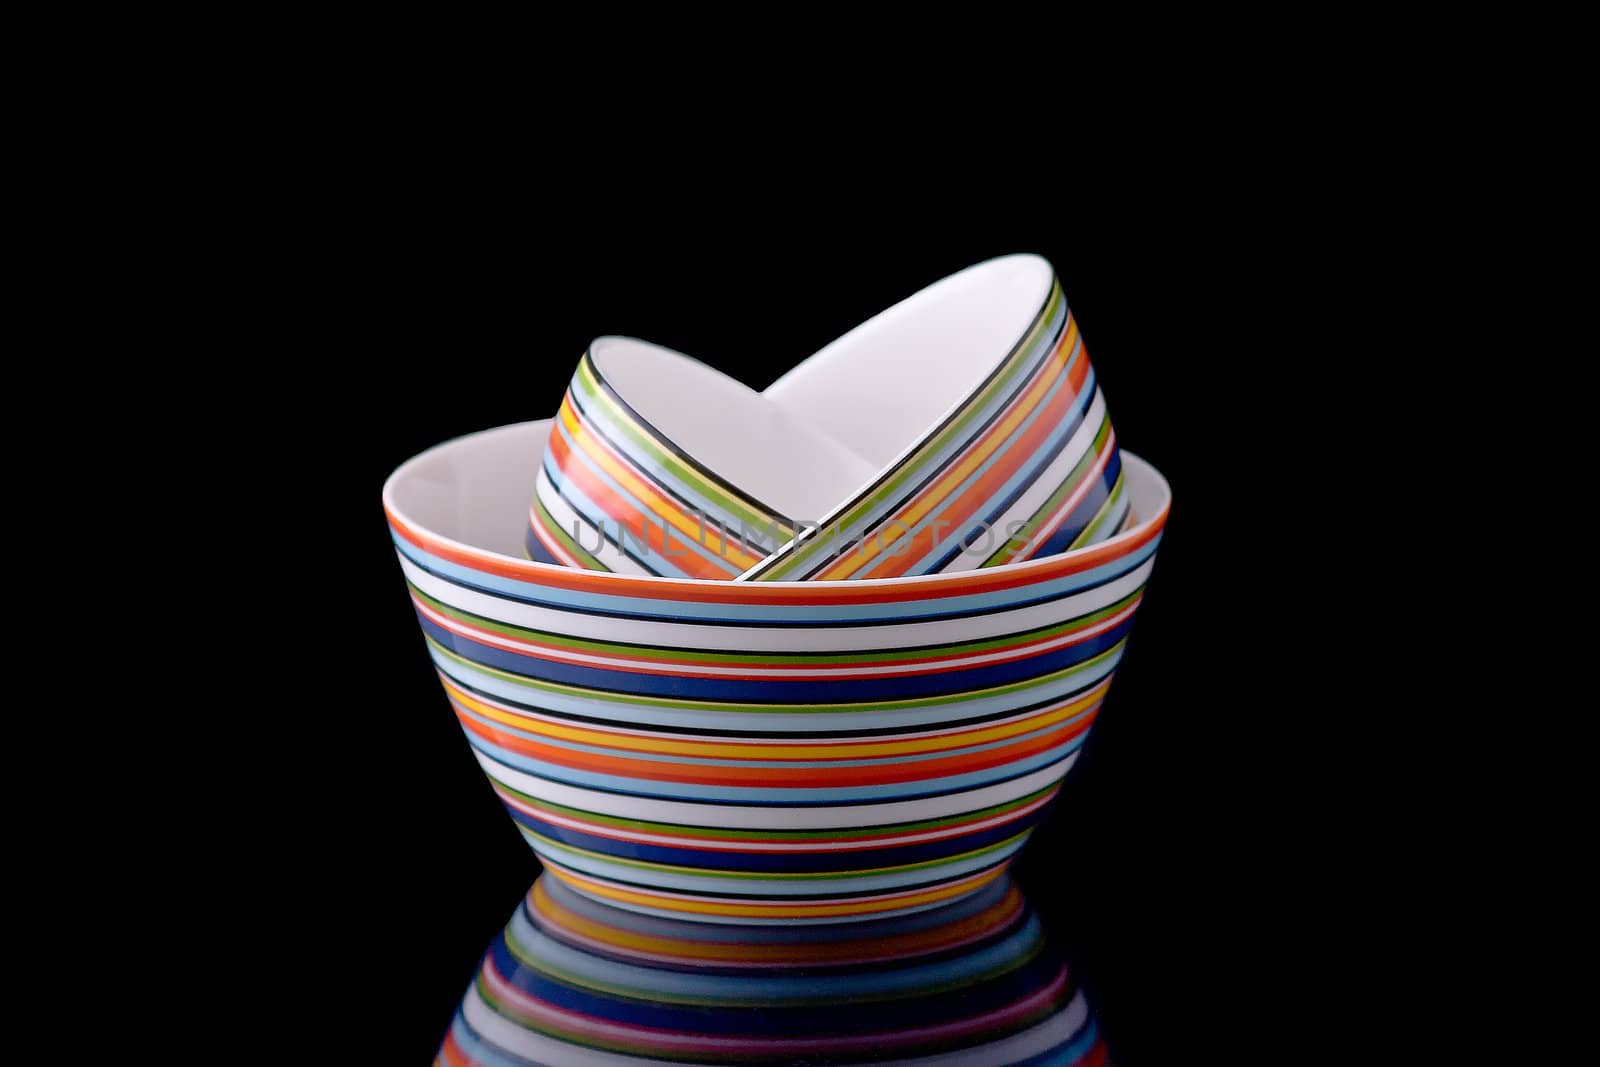  Stack of bowls by lavsen